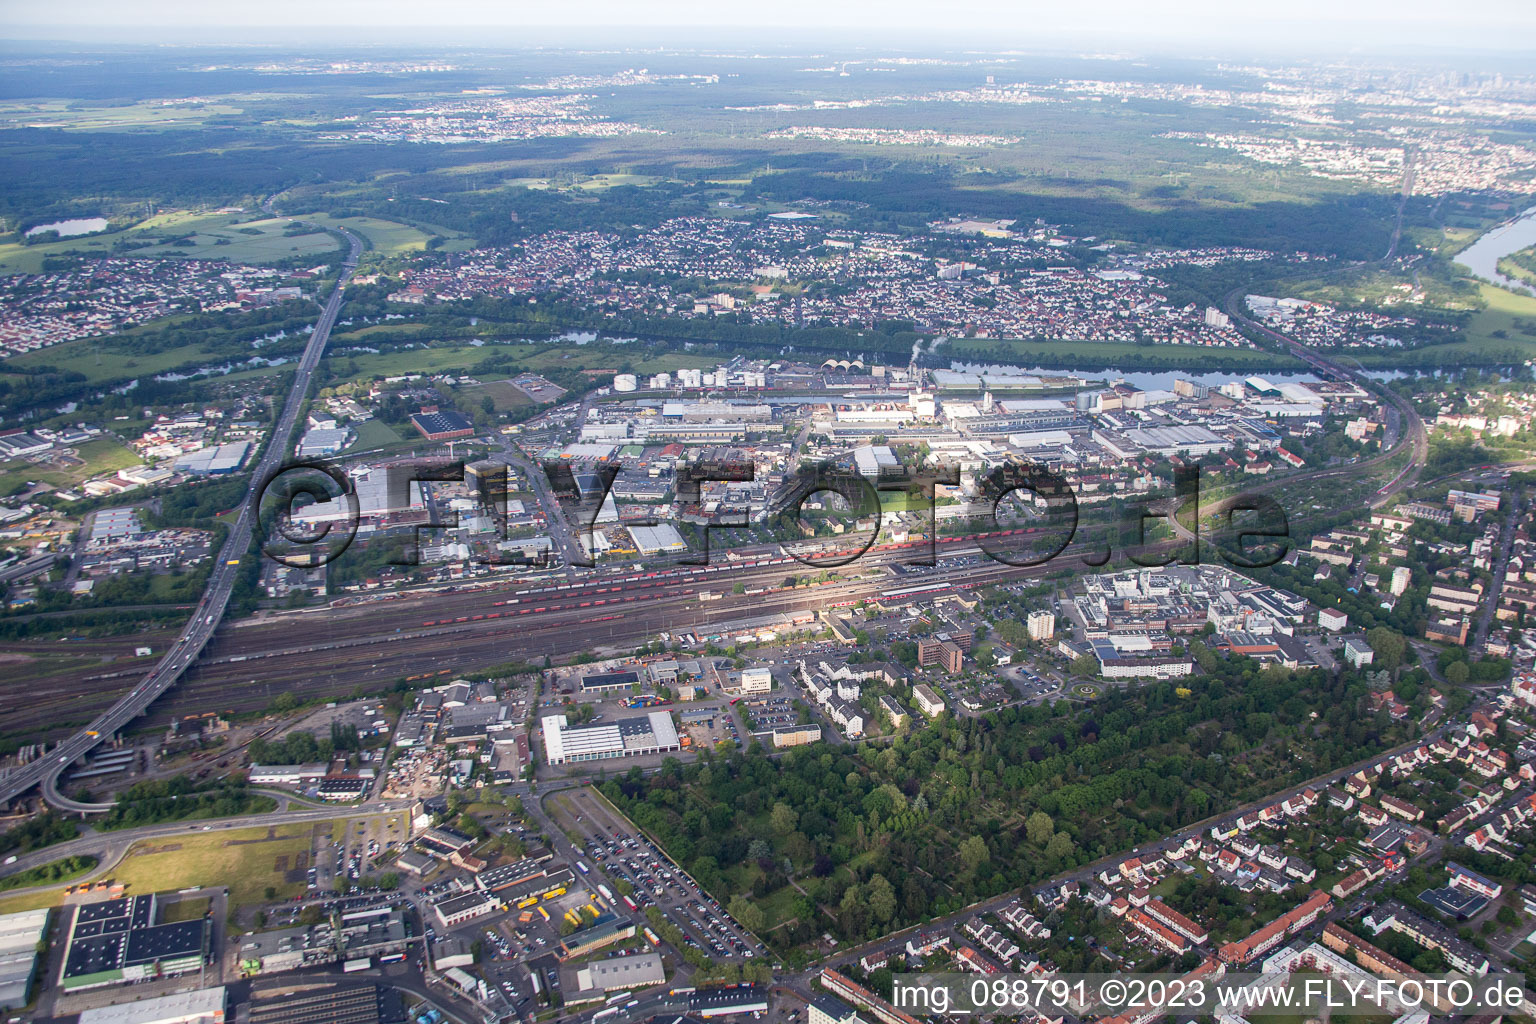 Aerial photograpy of Hanau in the state Hesse, Germany